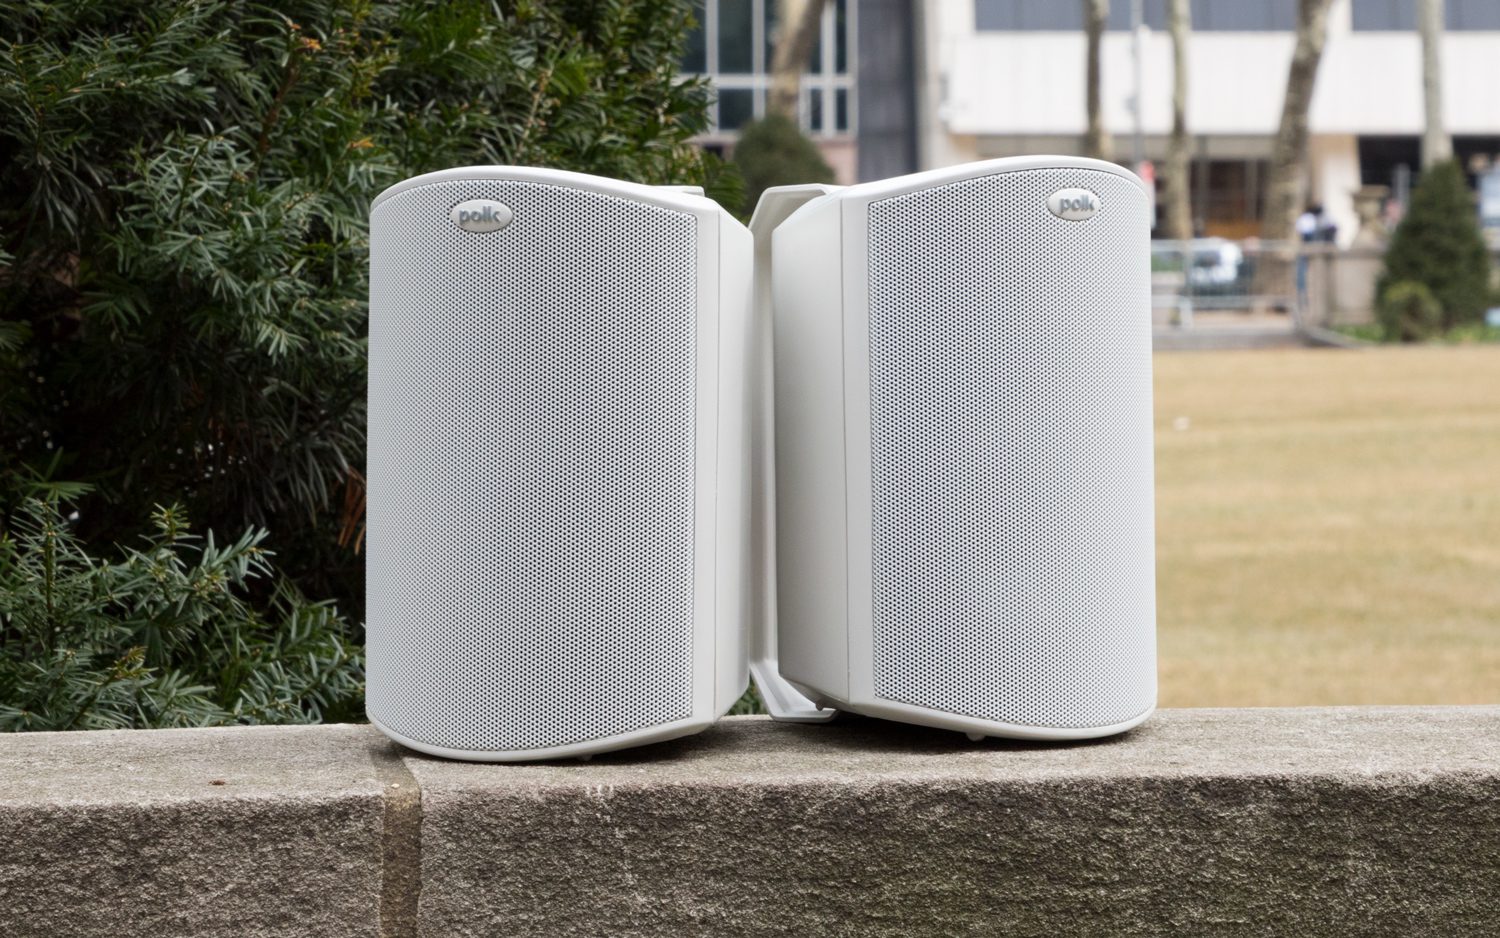 Want to know more about the best outdoor speakers